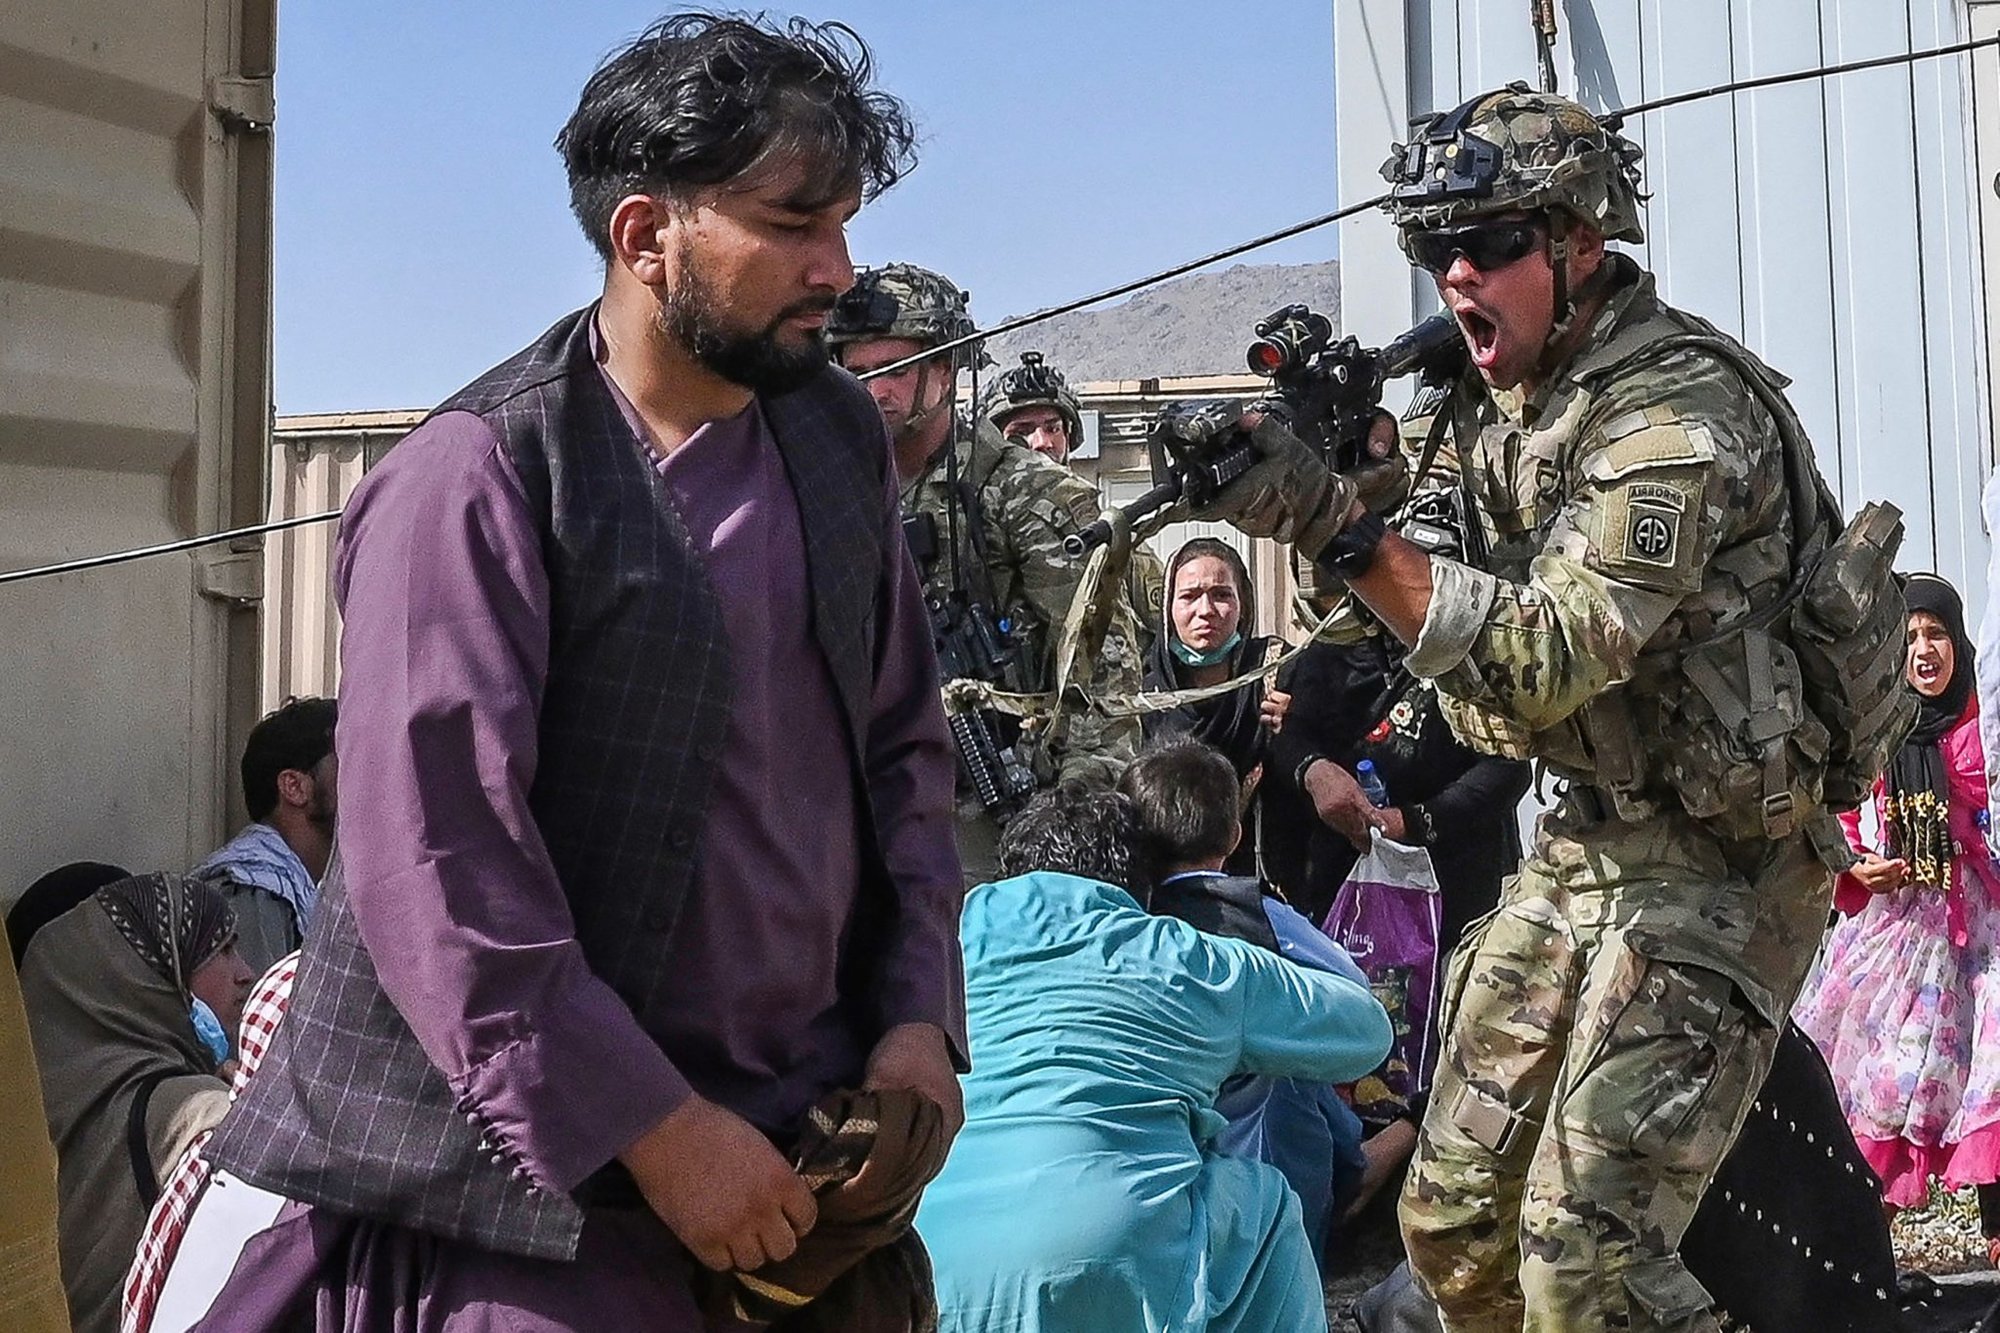 A US soldier points his gun toward an Afghan passenger at the Kabul airport in Kabul on Aug. 16, 2021, after a stunningly swift end to Afghanistan’s 20-year war, as thousands of people mobbed the city’s airport trying to flee the group’s feared hardline brand of Islamist rule. Photo by Wakil Kohsar/AFP.